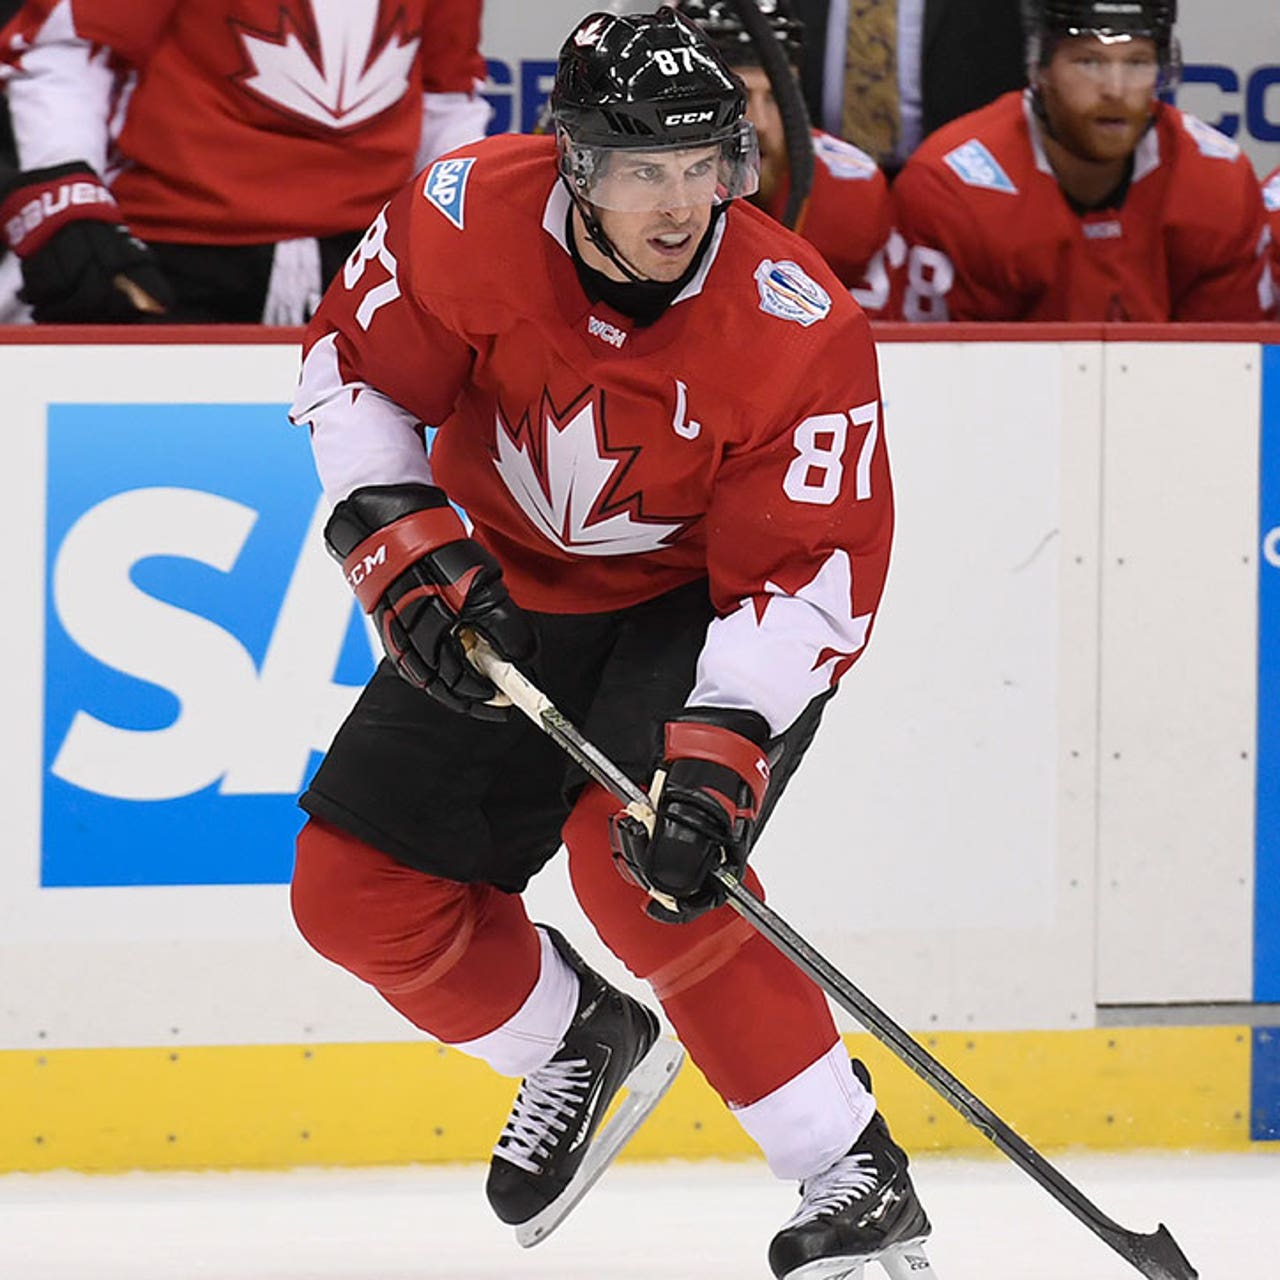 Sidney Crosby provides 'special moment' for Team Canada's leaders